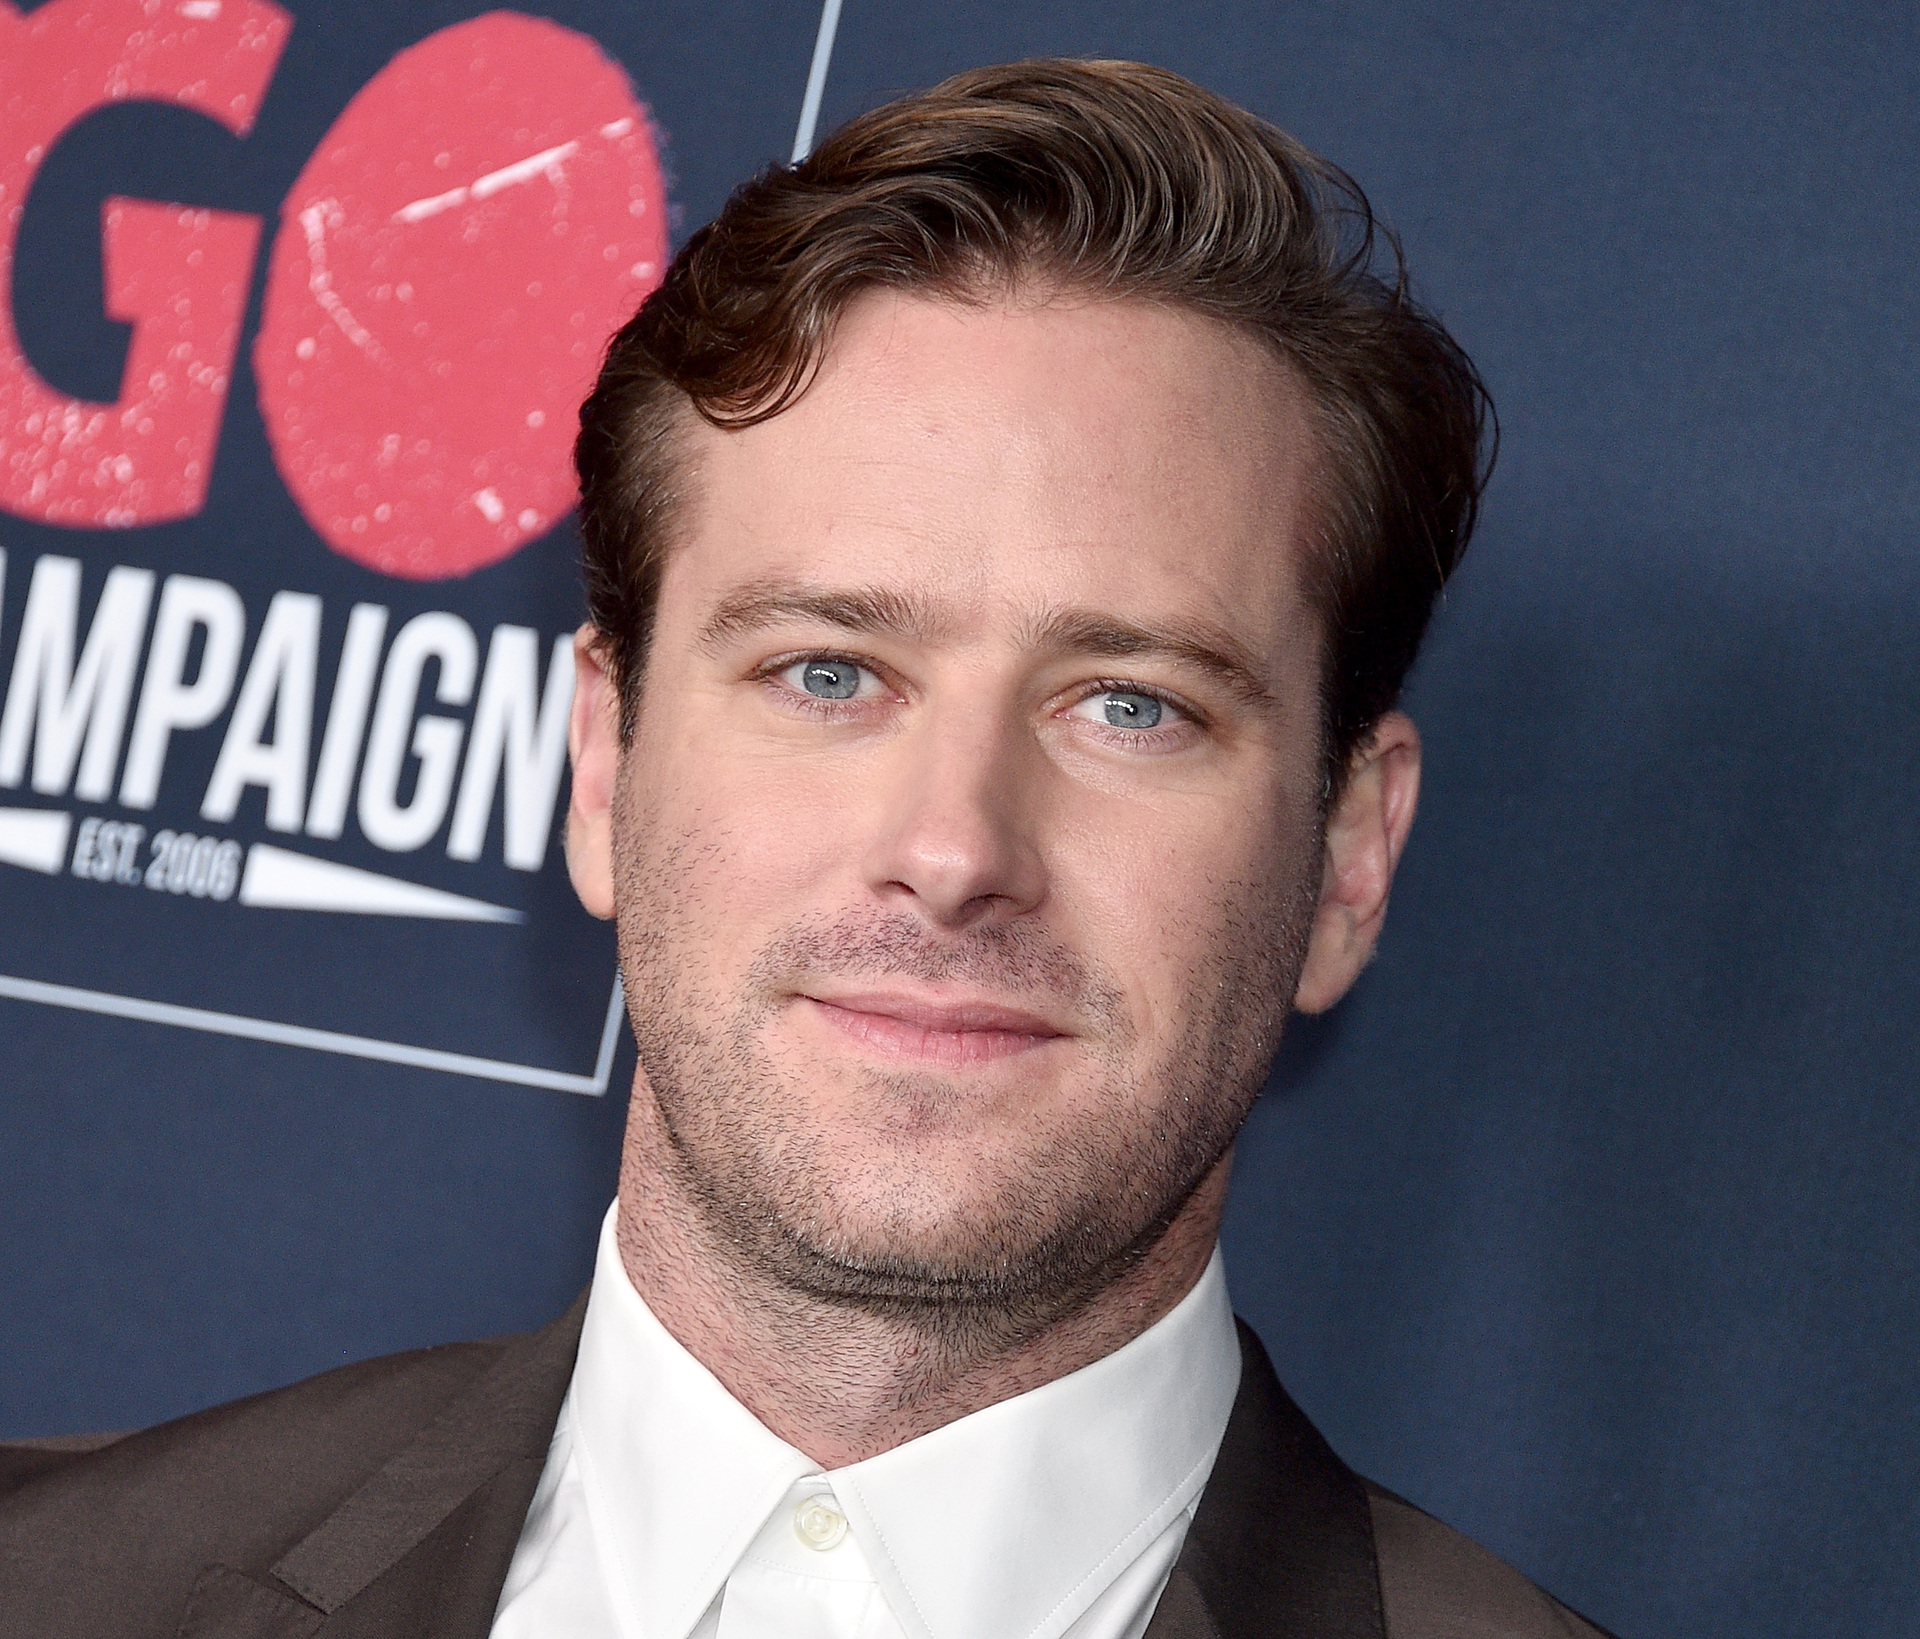 Disgraced Armie Hammer reportedly and working from cubicle - NZ